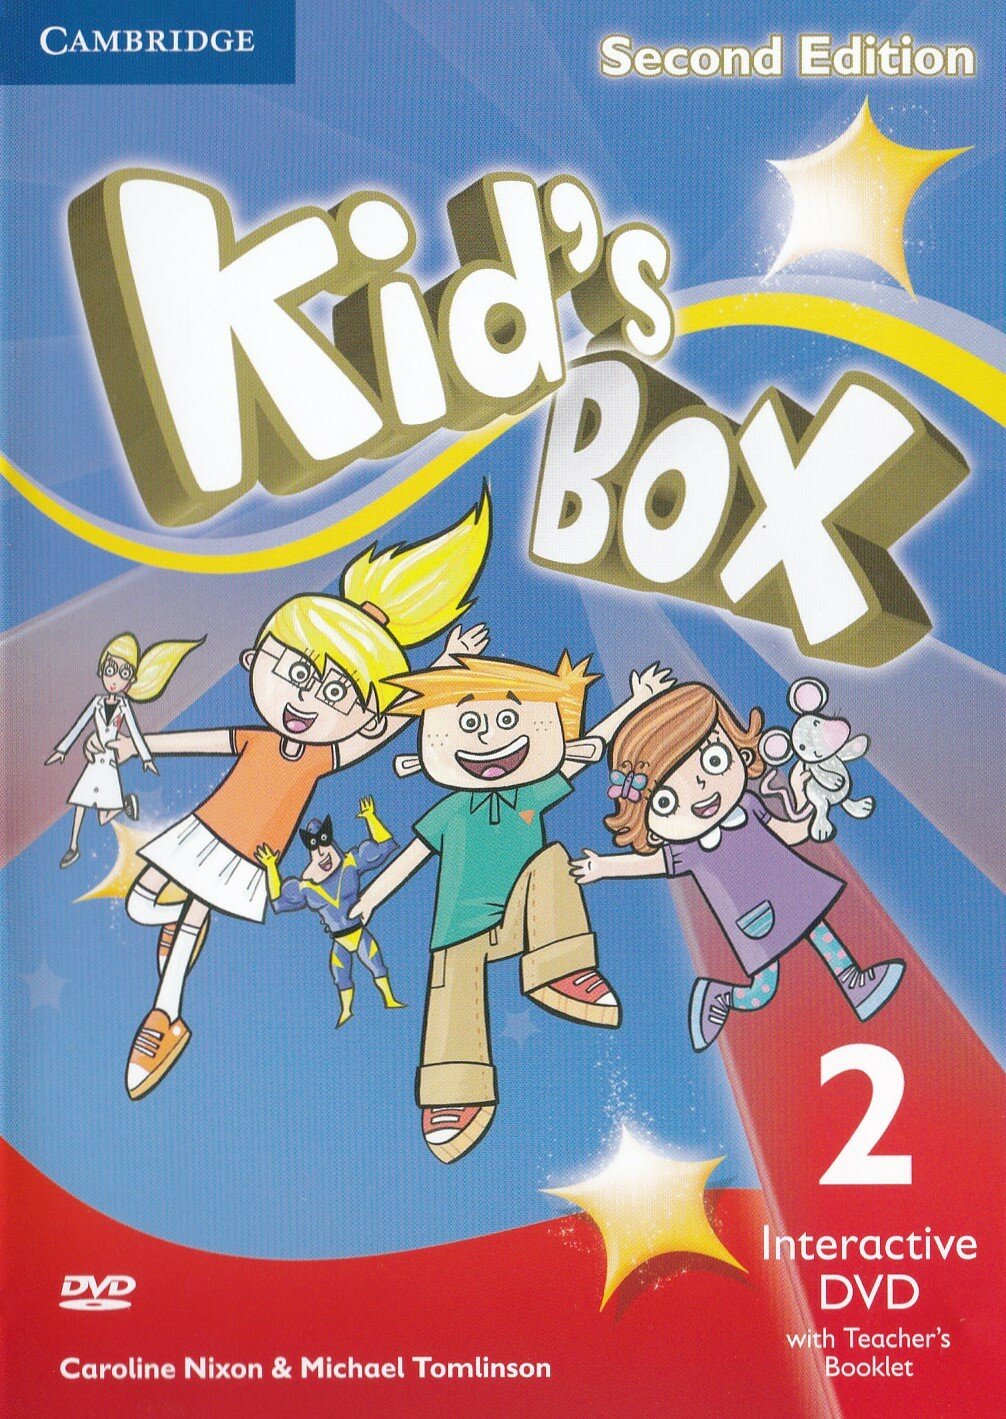 Kid's Box Updated Second Edition 2 Interactive DVD with Teacher's Booklet